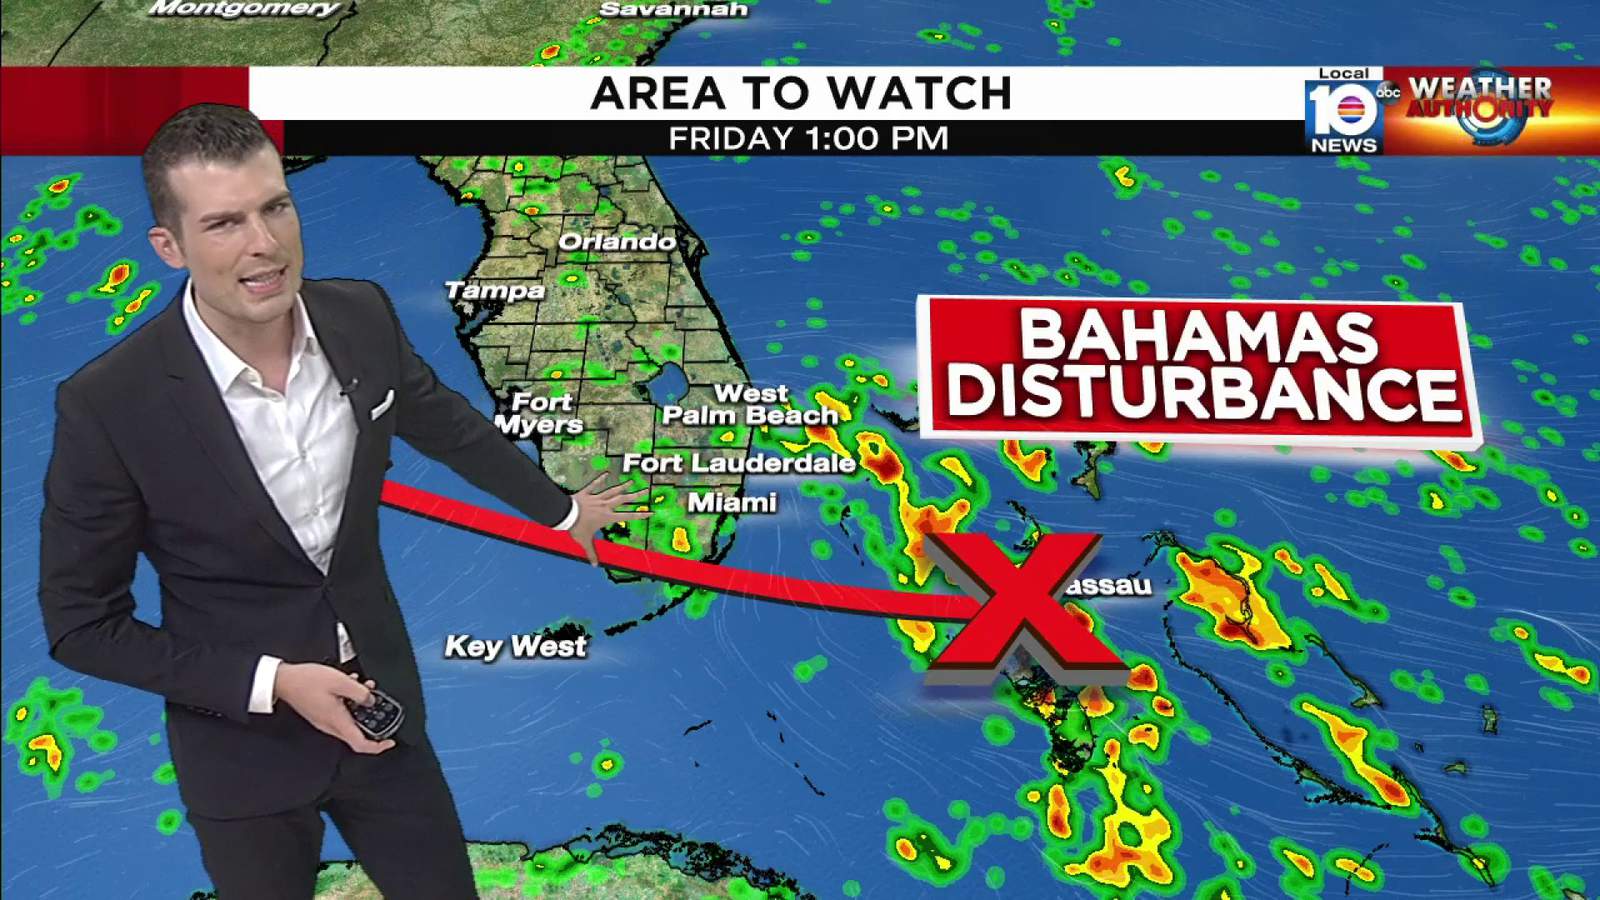 Disturbance could become tropical depression as it approaches South Florida